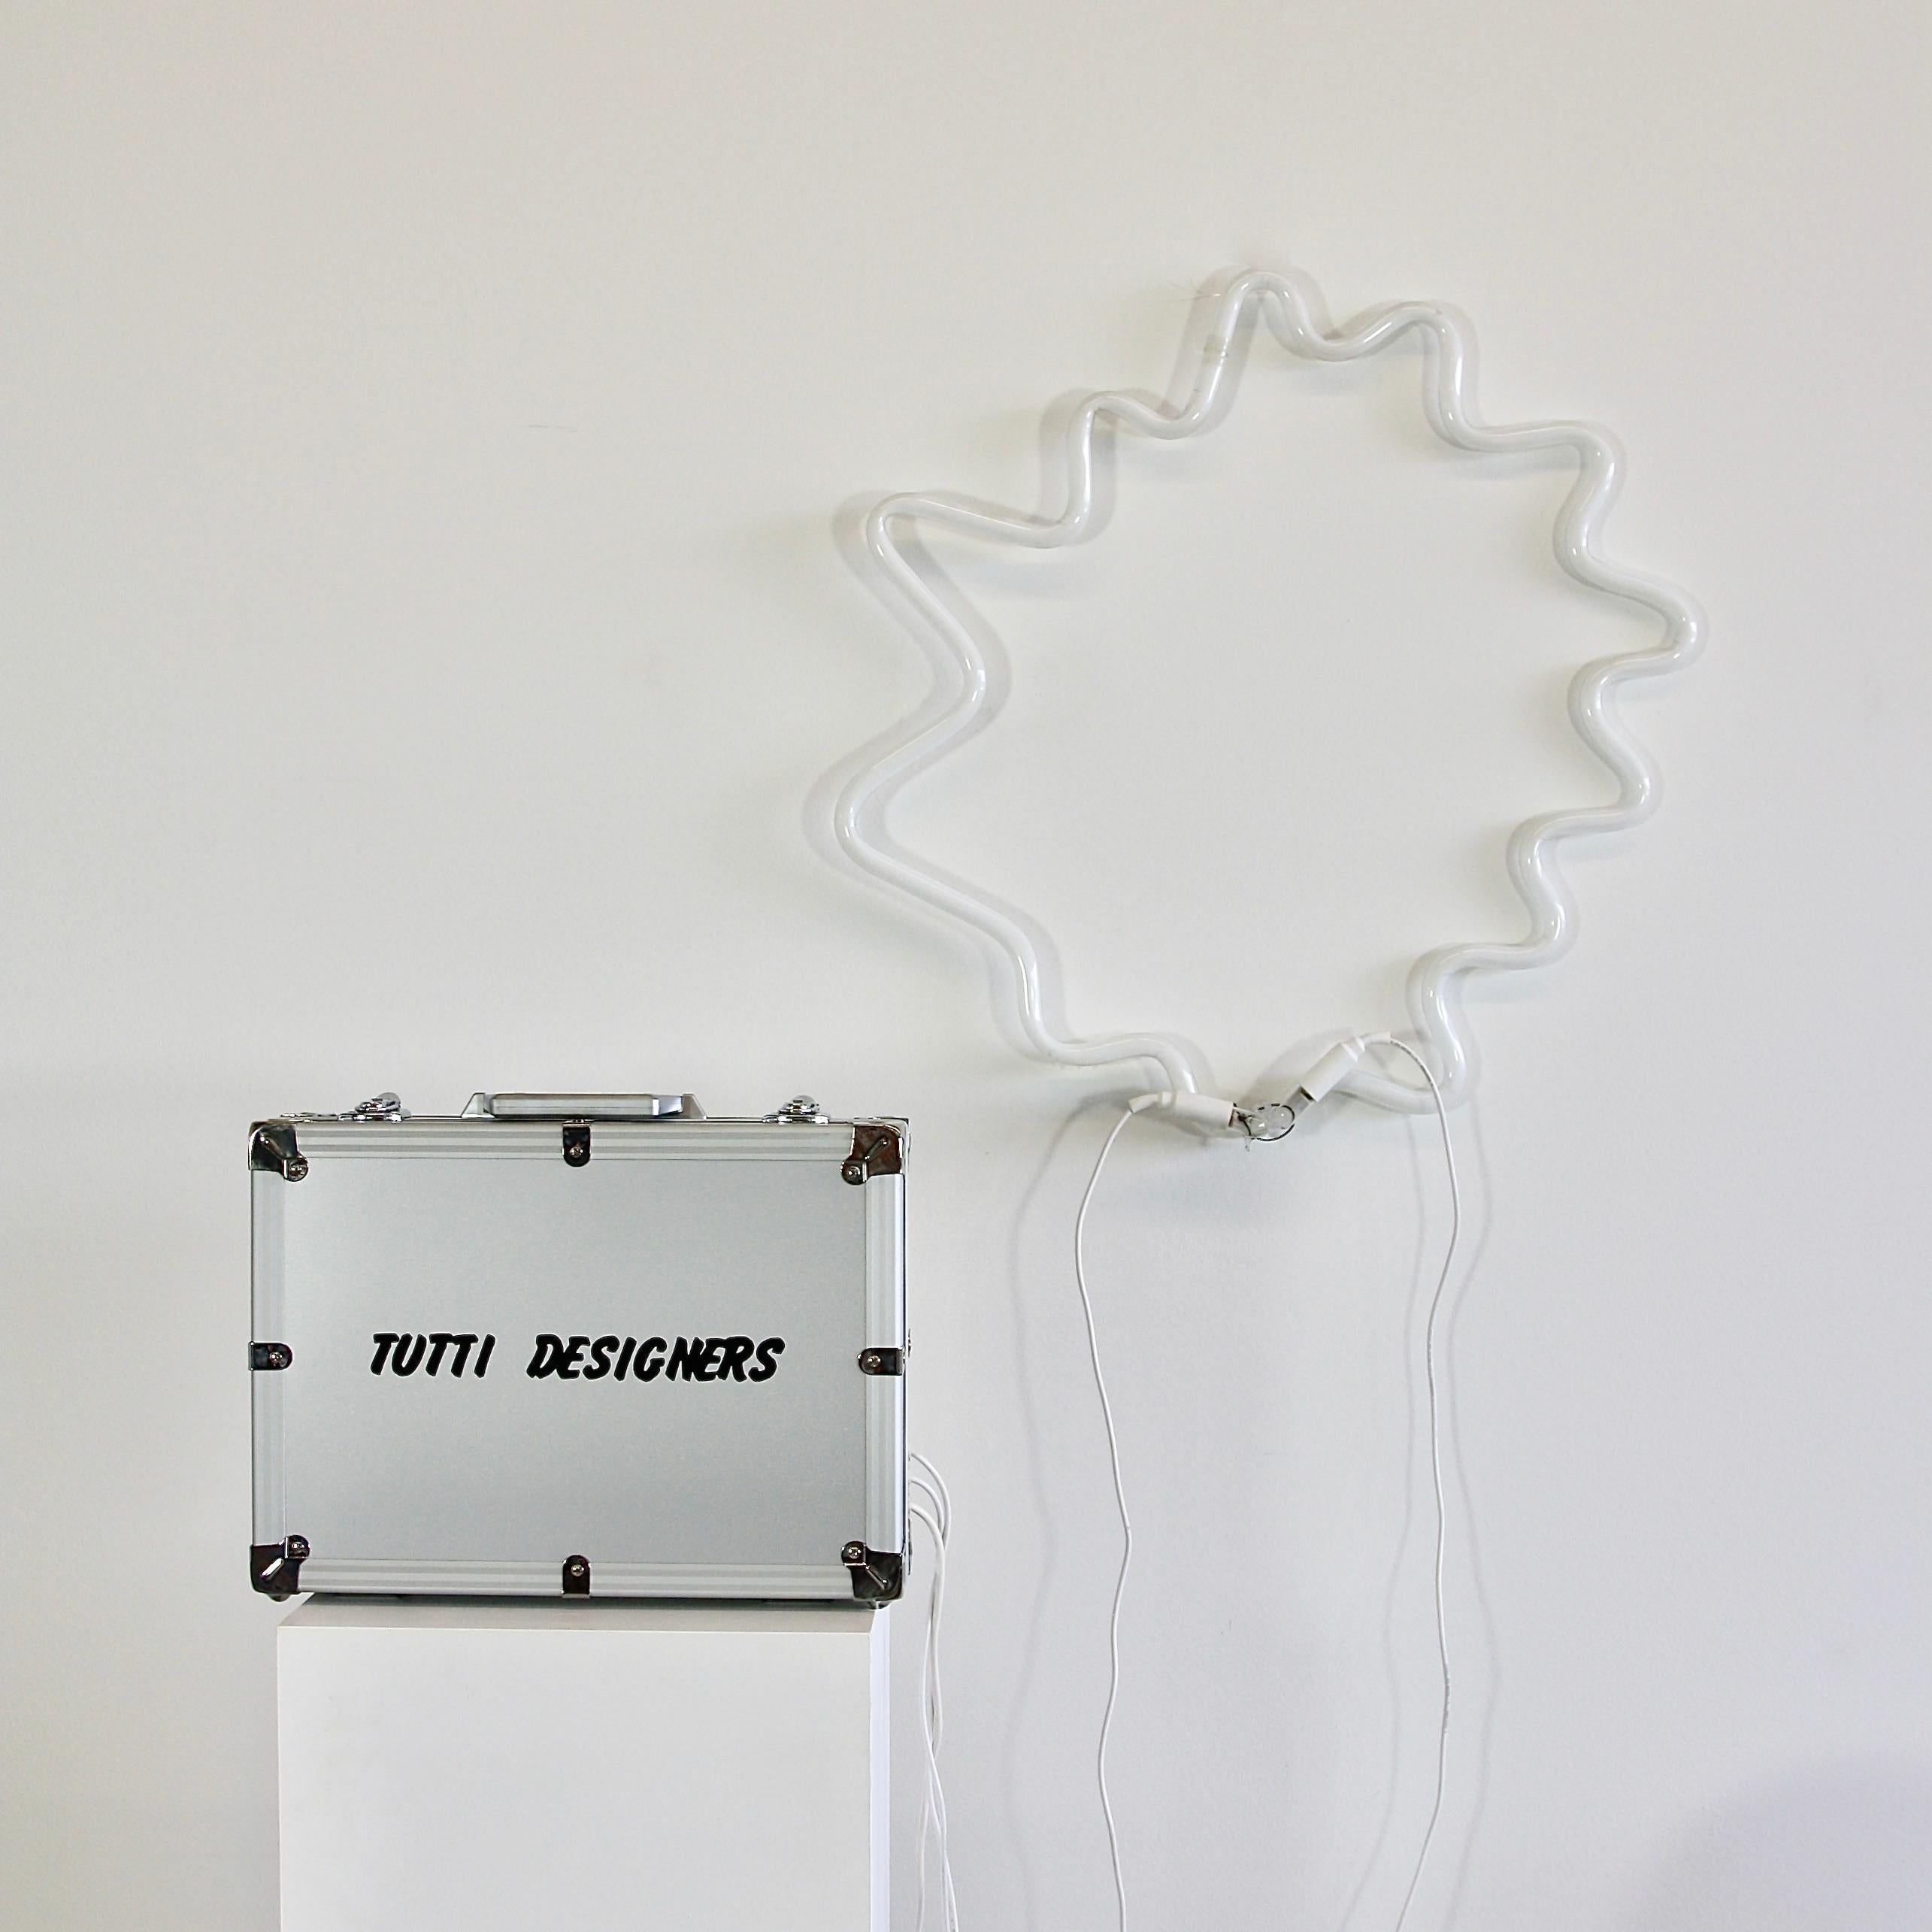 Neon multiple designed by Michelangelo Pistoletto. Italy, meta memphis, 1989.

Neon art work 'Tutti Designers' by Michelangelo Pistoletto, comprising of an aluminium briefcase with black silksreen lettering and a large neon 'cloud'. Cool object!